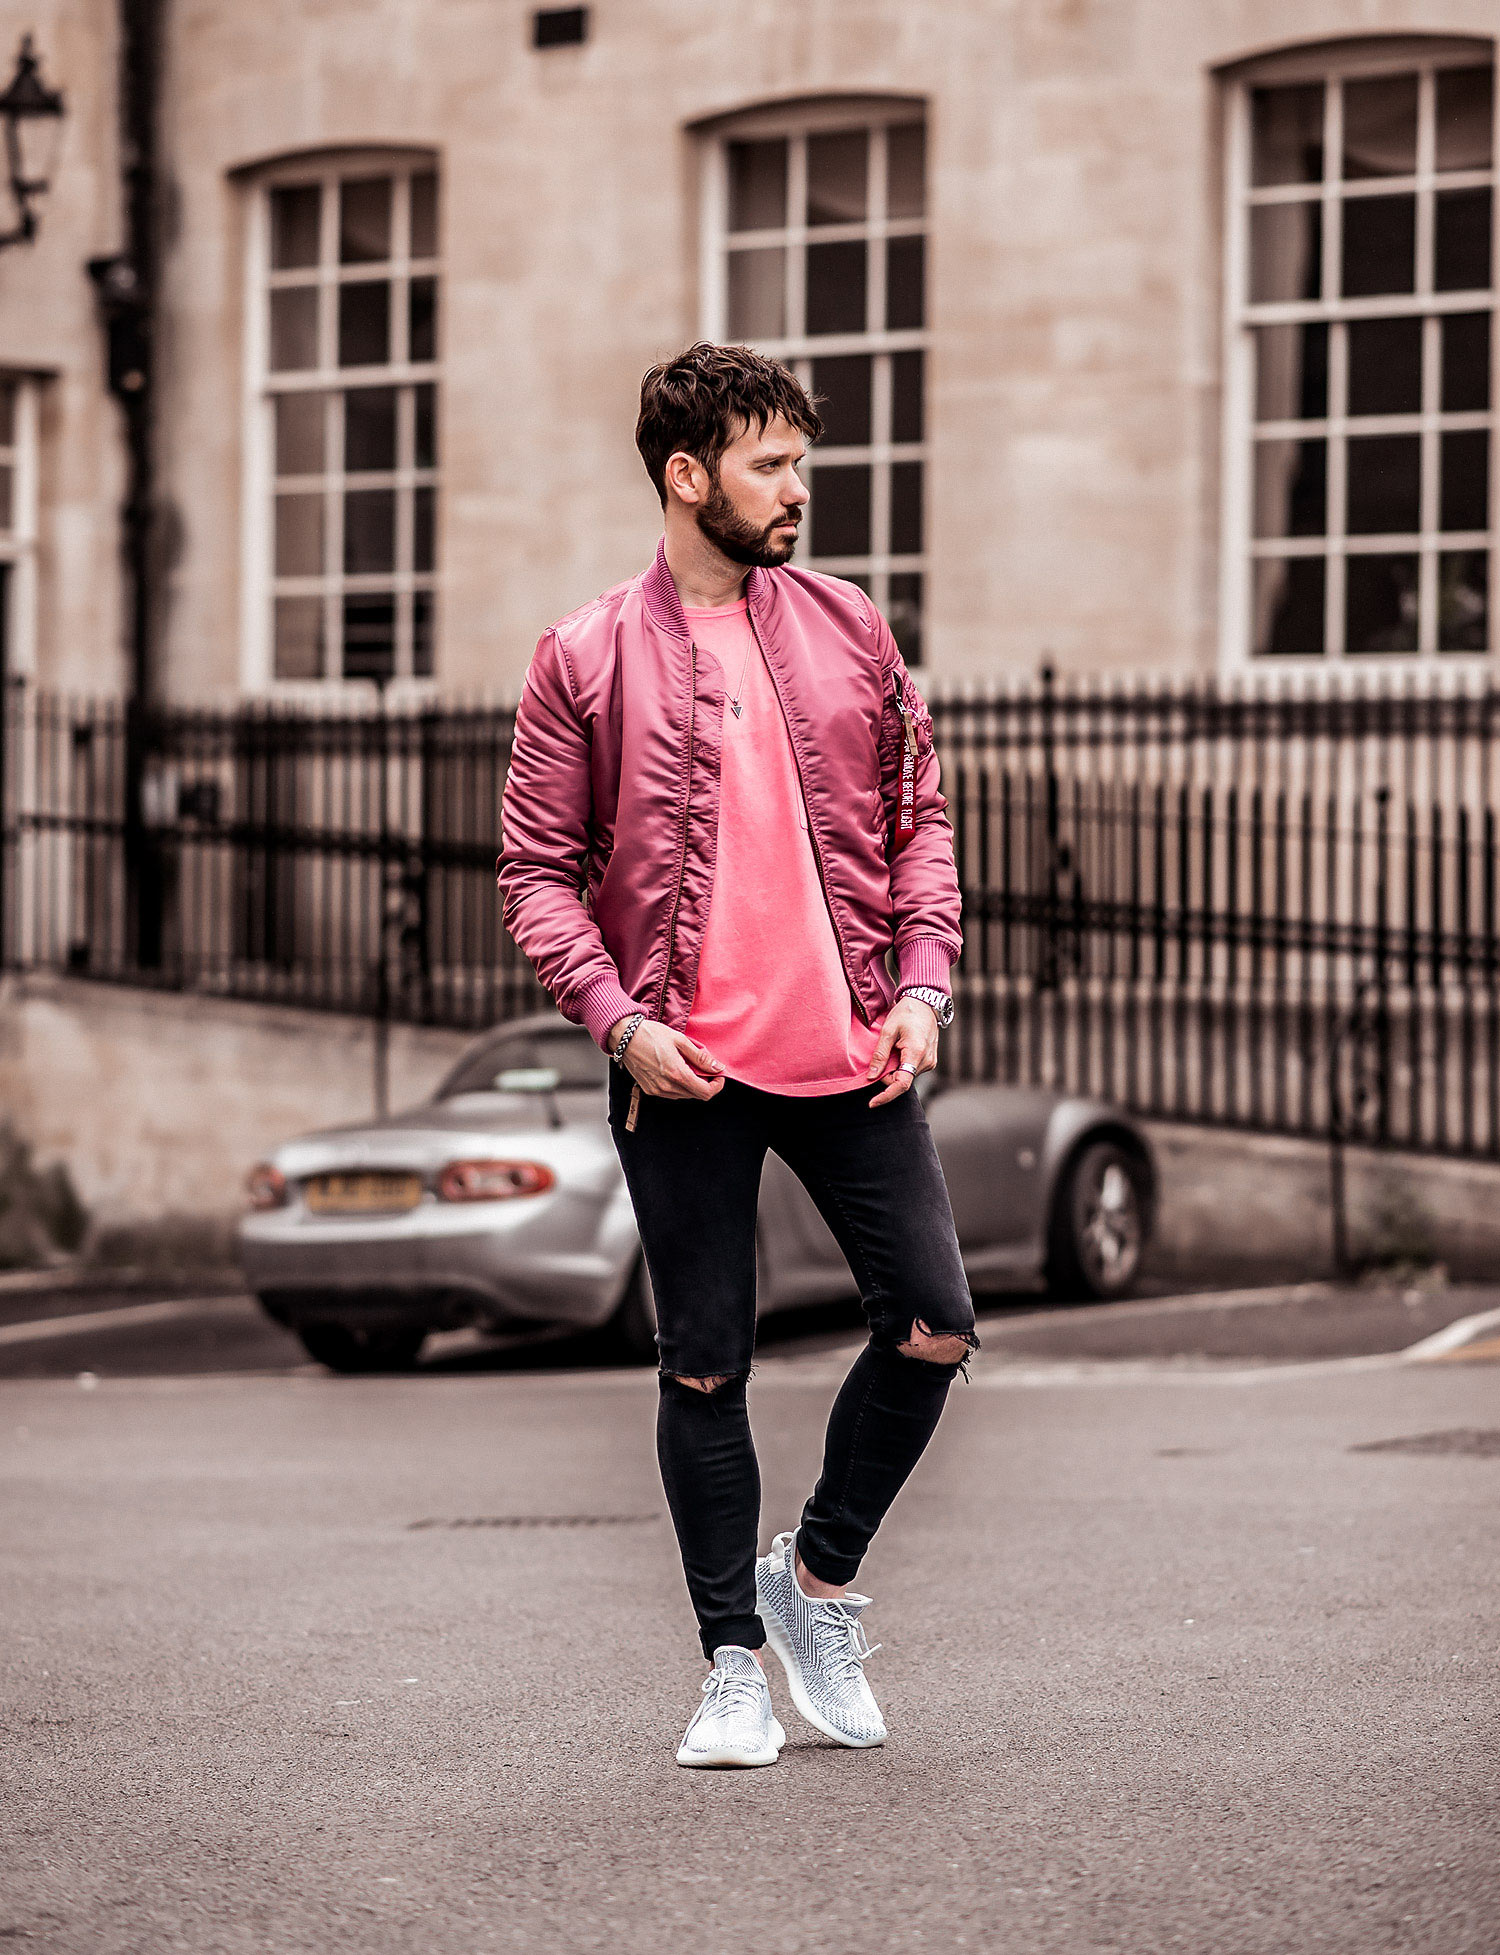 https://youraverageguystyle.com/wp-content/uploads/2019/05/Mens-Fashion-Blog-How-To-Wear-Pink-For-Men-2.jpg